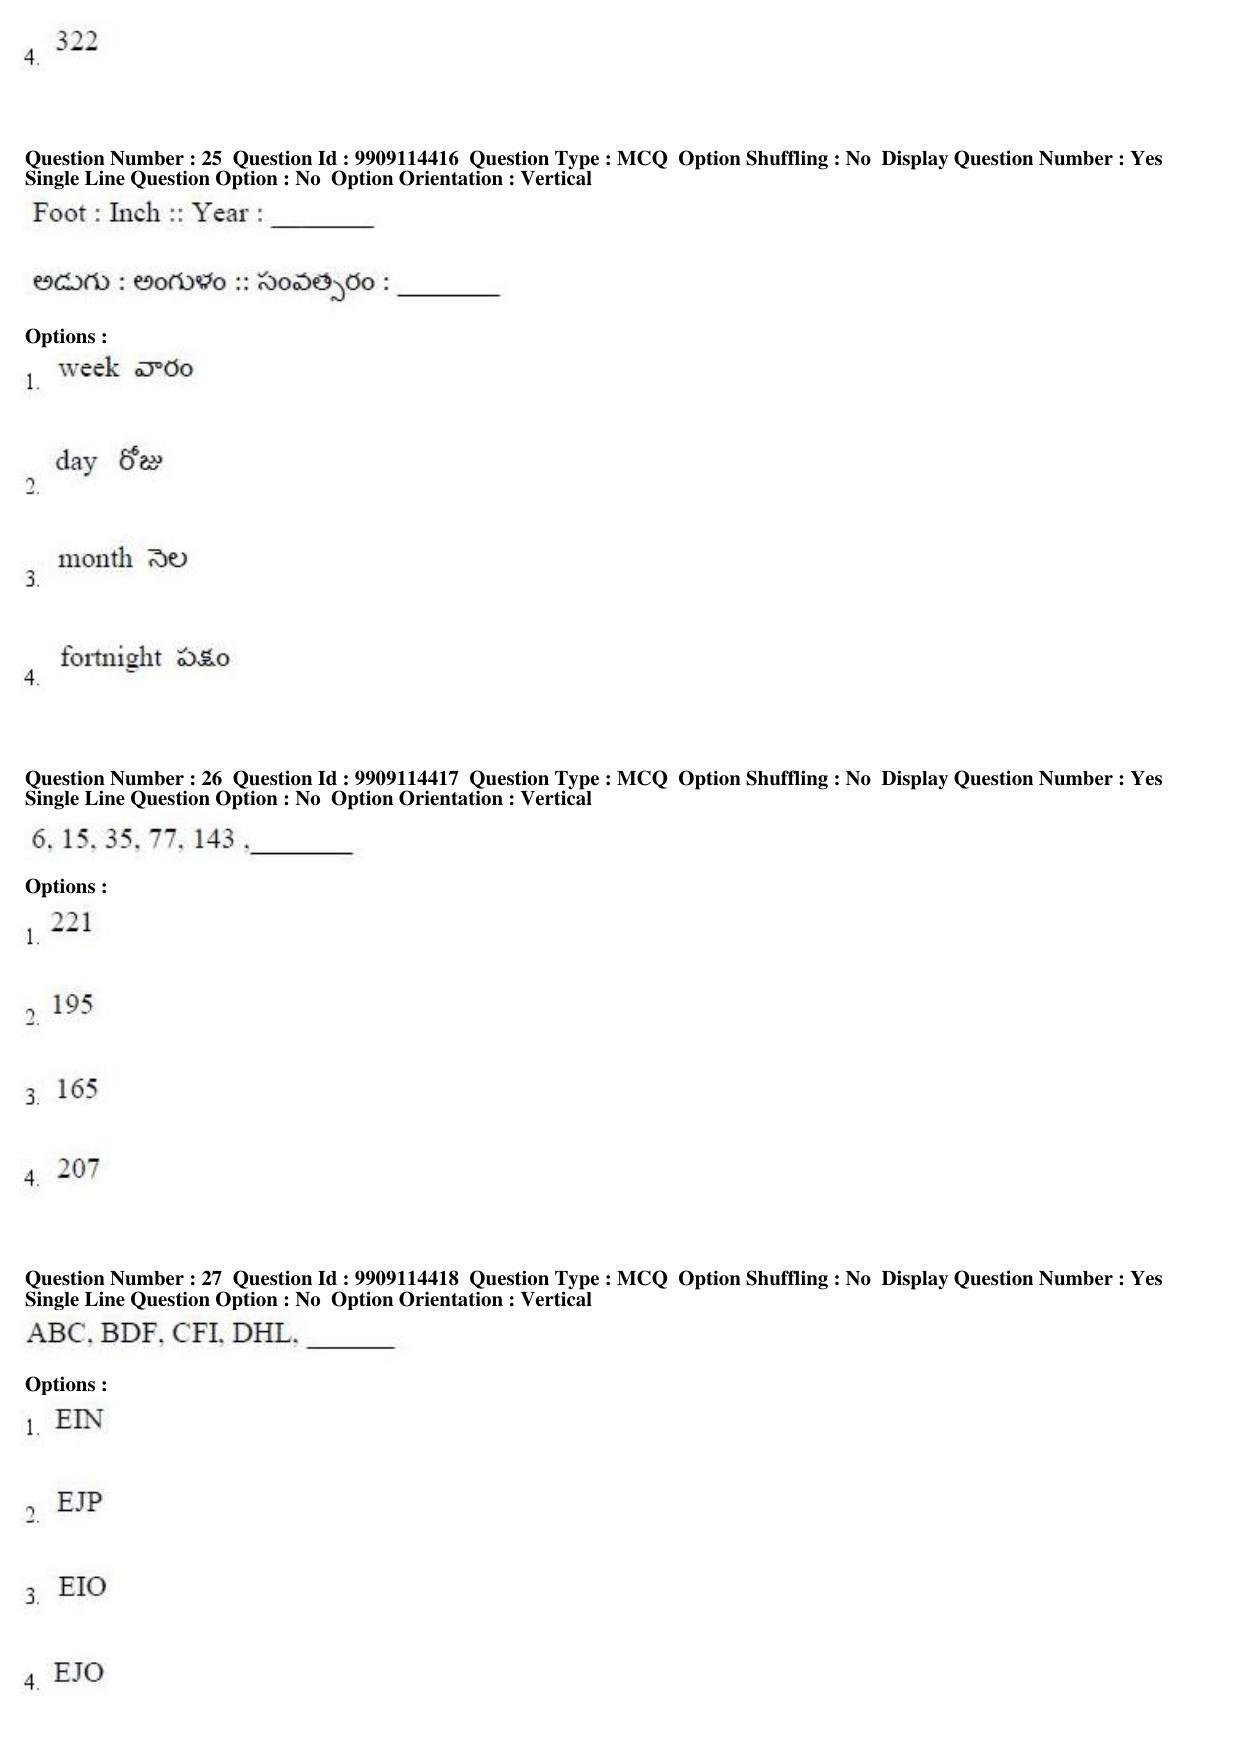 AP ICET 2019 - Shift 1 Question Paper With Preliminary Keys - Page 13